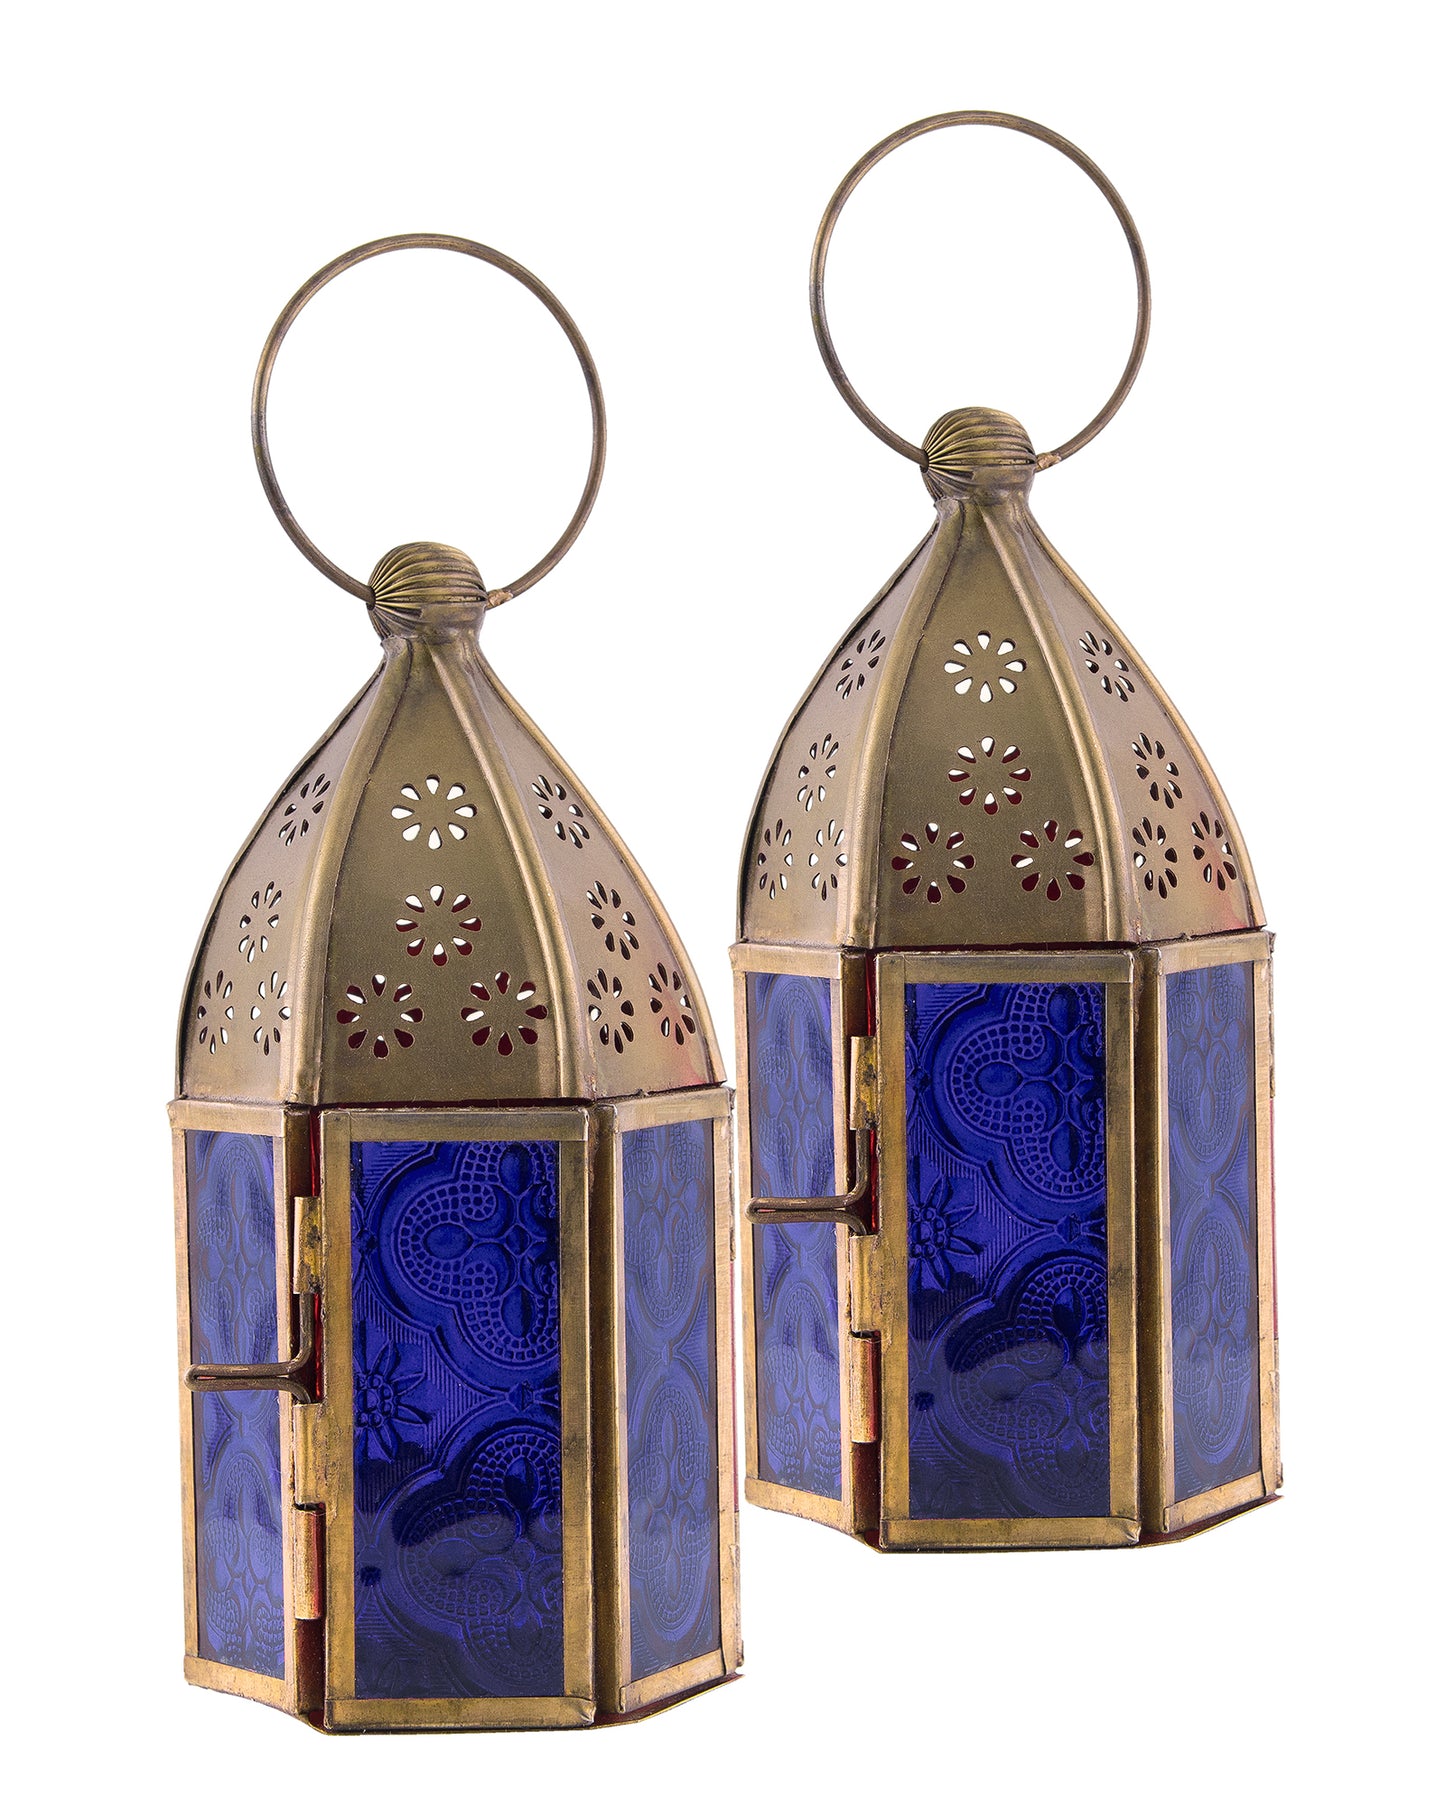 Metal Decorative Antique Brass Finish Moroccan Lantern Candle Holder, Set of 2, Tealight Hanging Home Office Decor